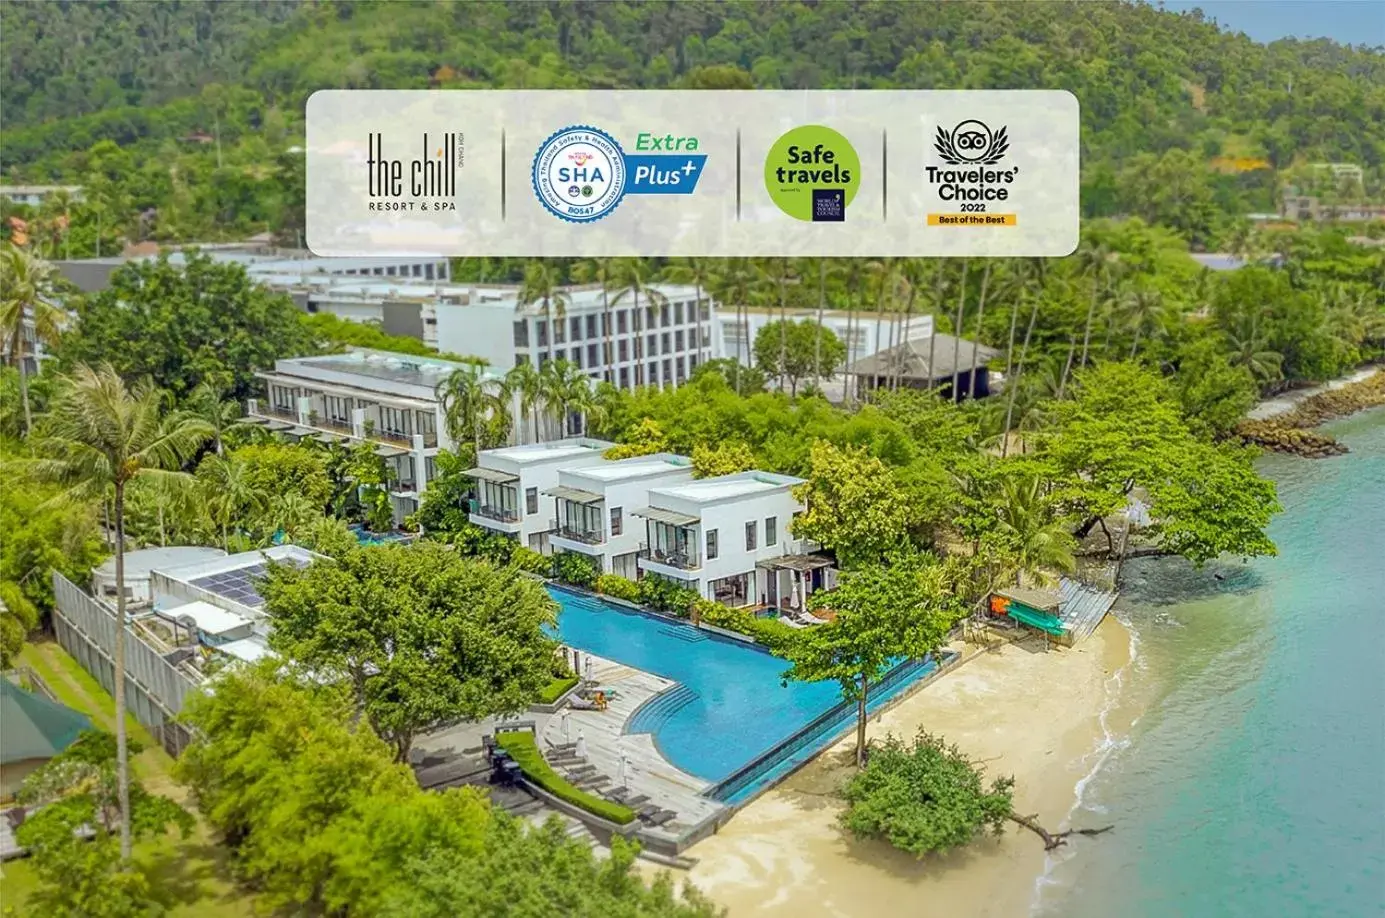 Property building, Bird's-eye View in The Chill Resort and Spa, Koh Chang